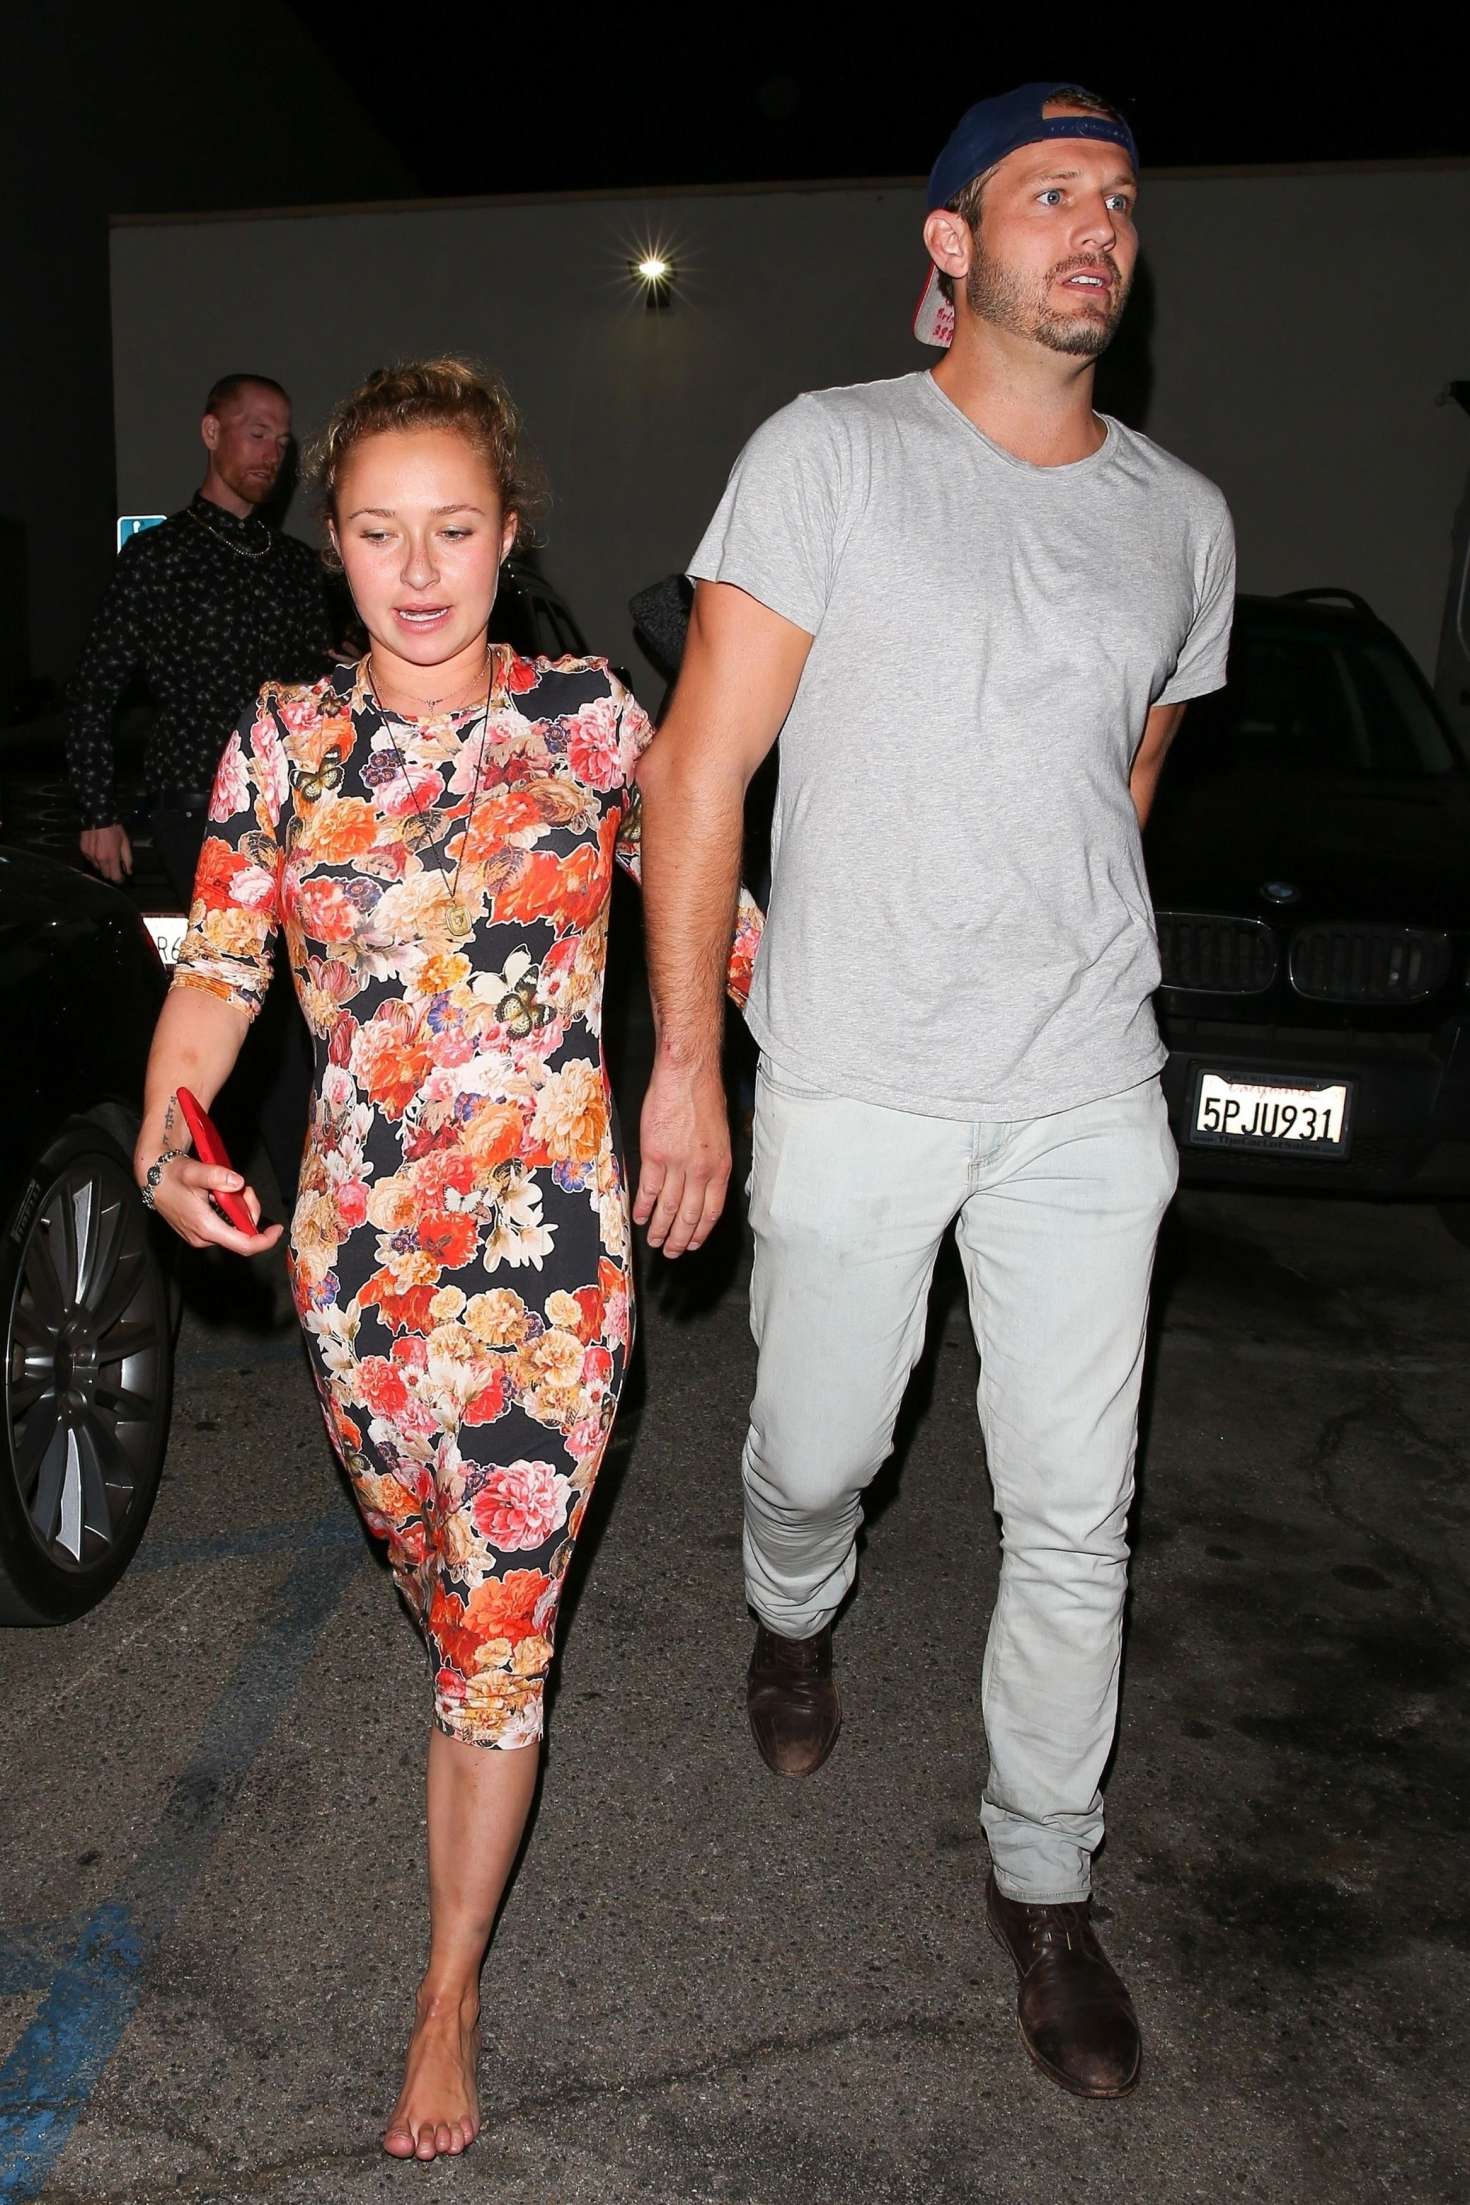 Hayden Panettiere in Floral Dress â€“ Leaves restaurant in Hollywood